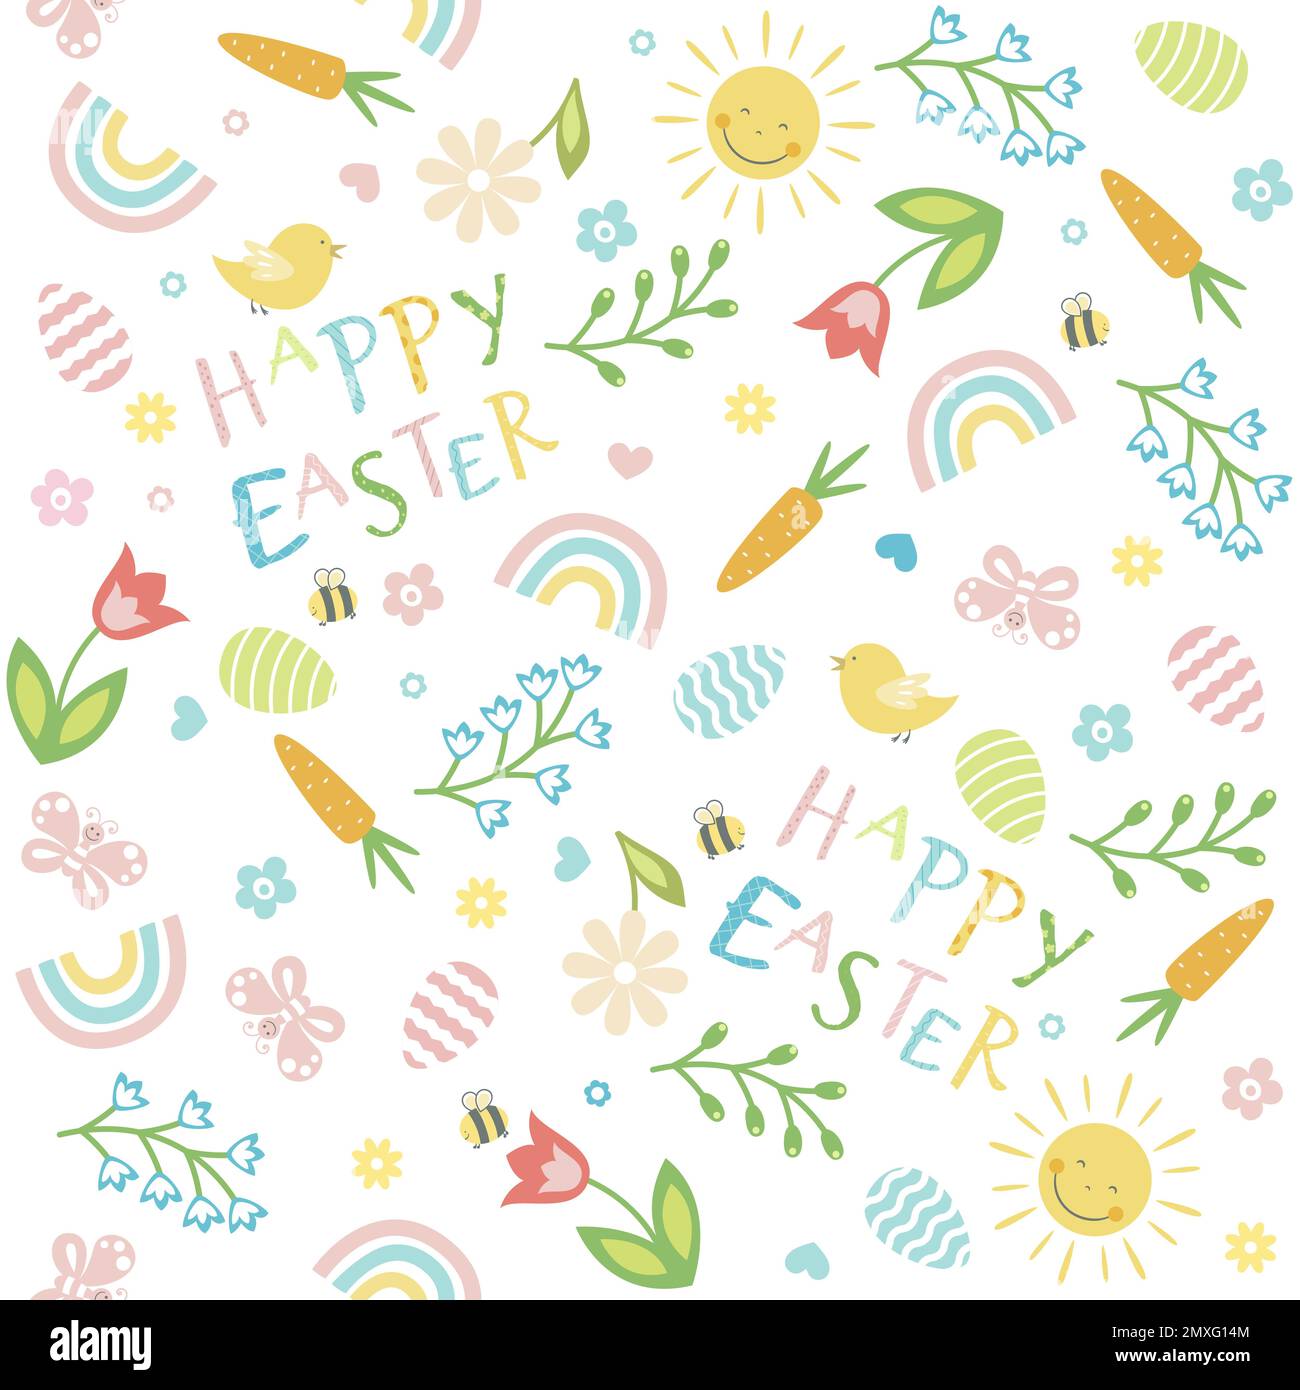 Happy Easter seamless pattern. Stock Vector